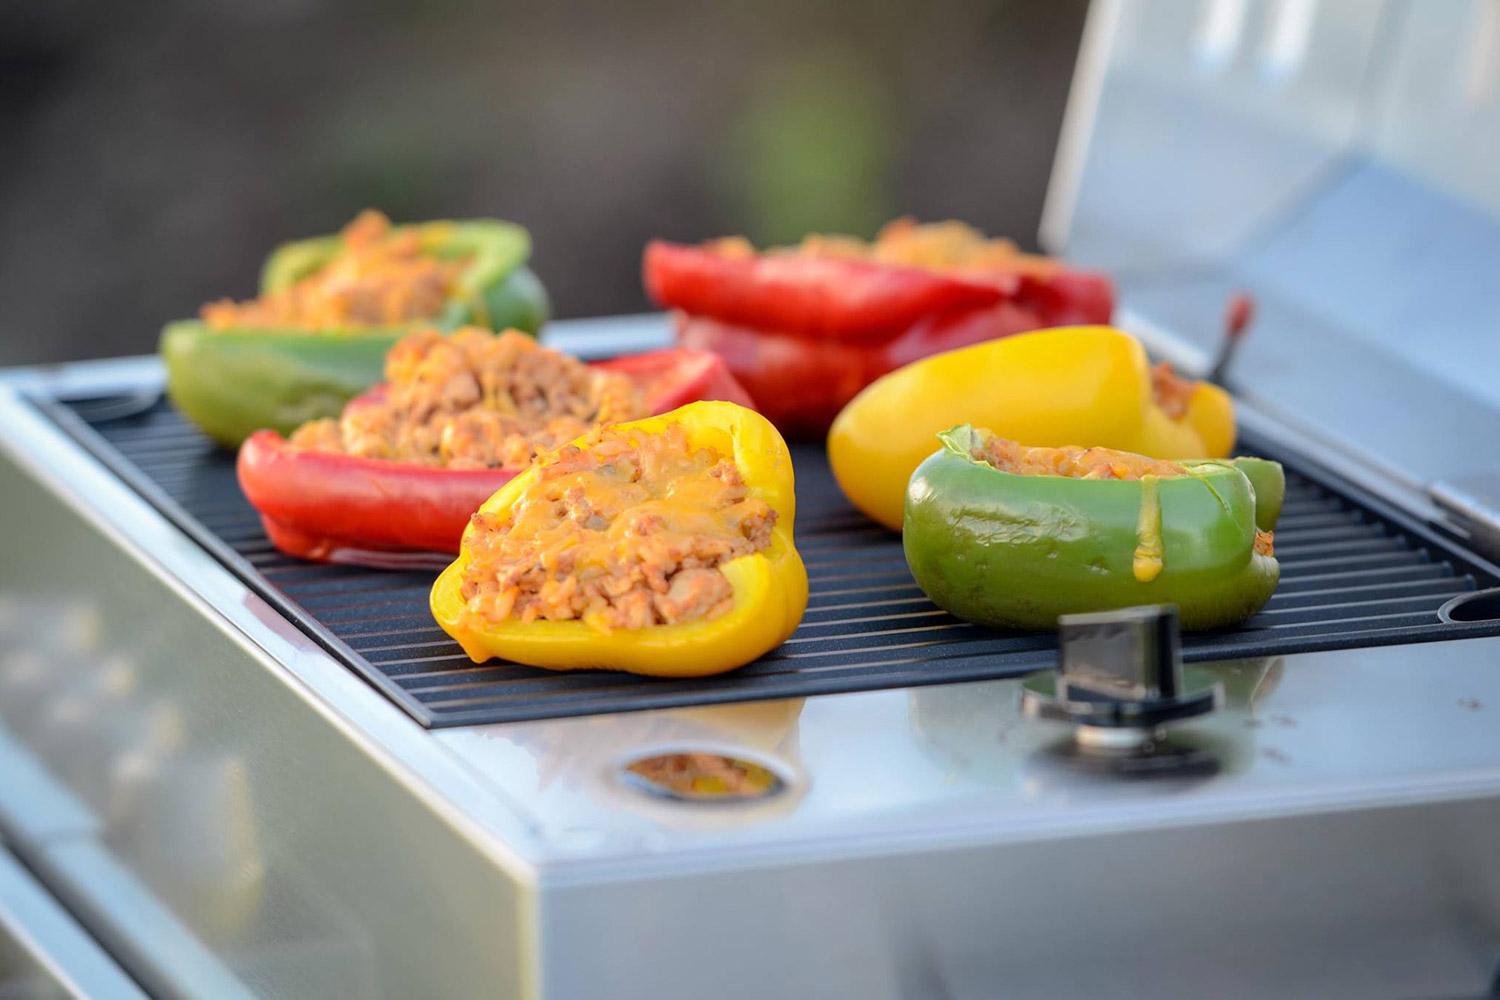 5 useful BBQ accessories to help you prepare for July 4th